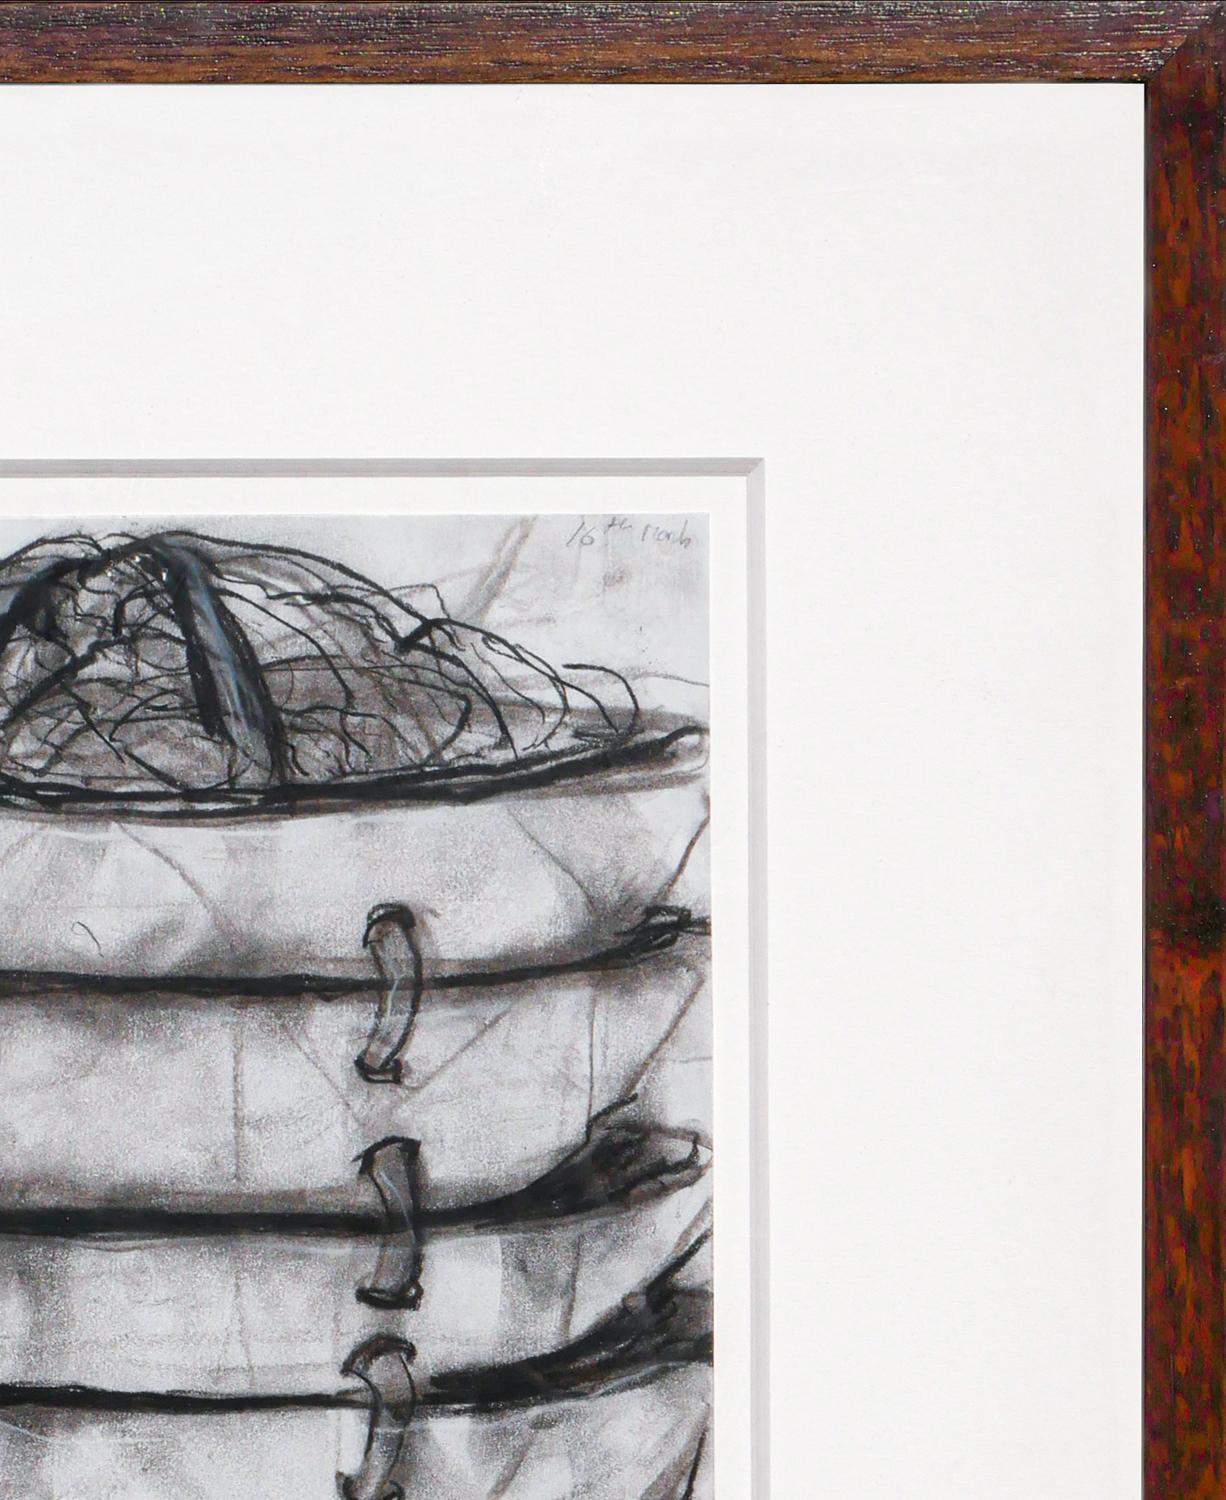 Monochromatic abstract still life drawing by Janice Redman. The piece depicts what appears to be a stack of bowls joined by strings. Signed by the artist at the lower right corner. Framed and matted in a modern wooden frame.

Dimensions With Frame: